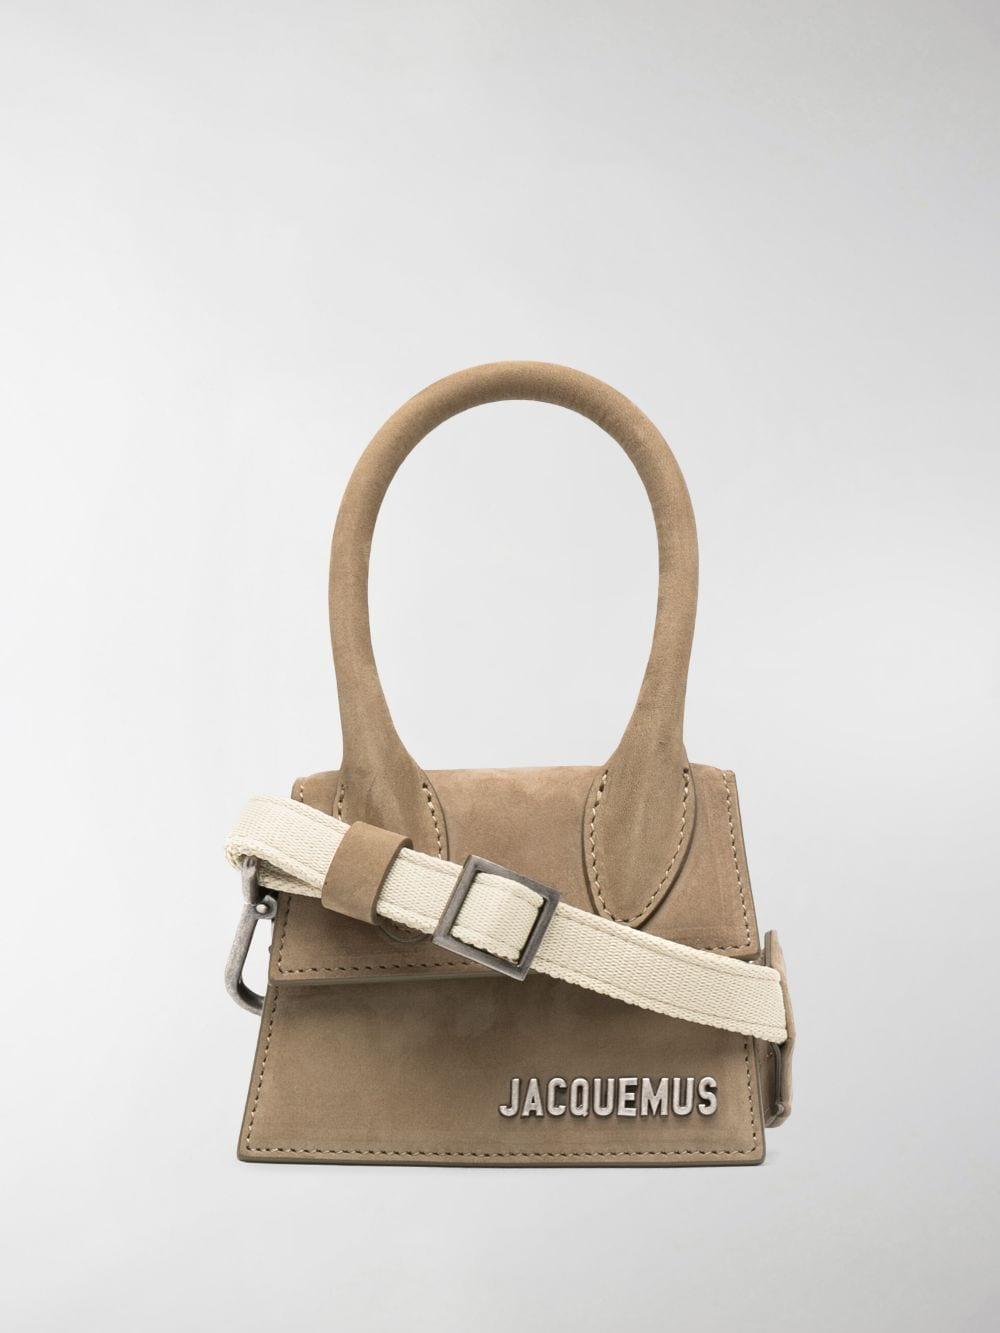 Jacquemus Leather Le Chiquito Homme Mini Bag in Green for Men - Lyst